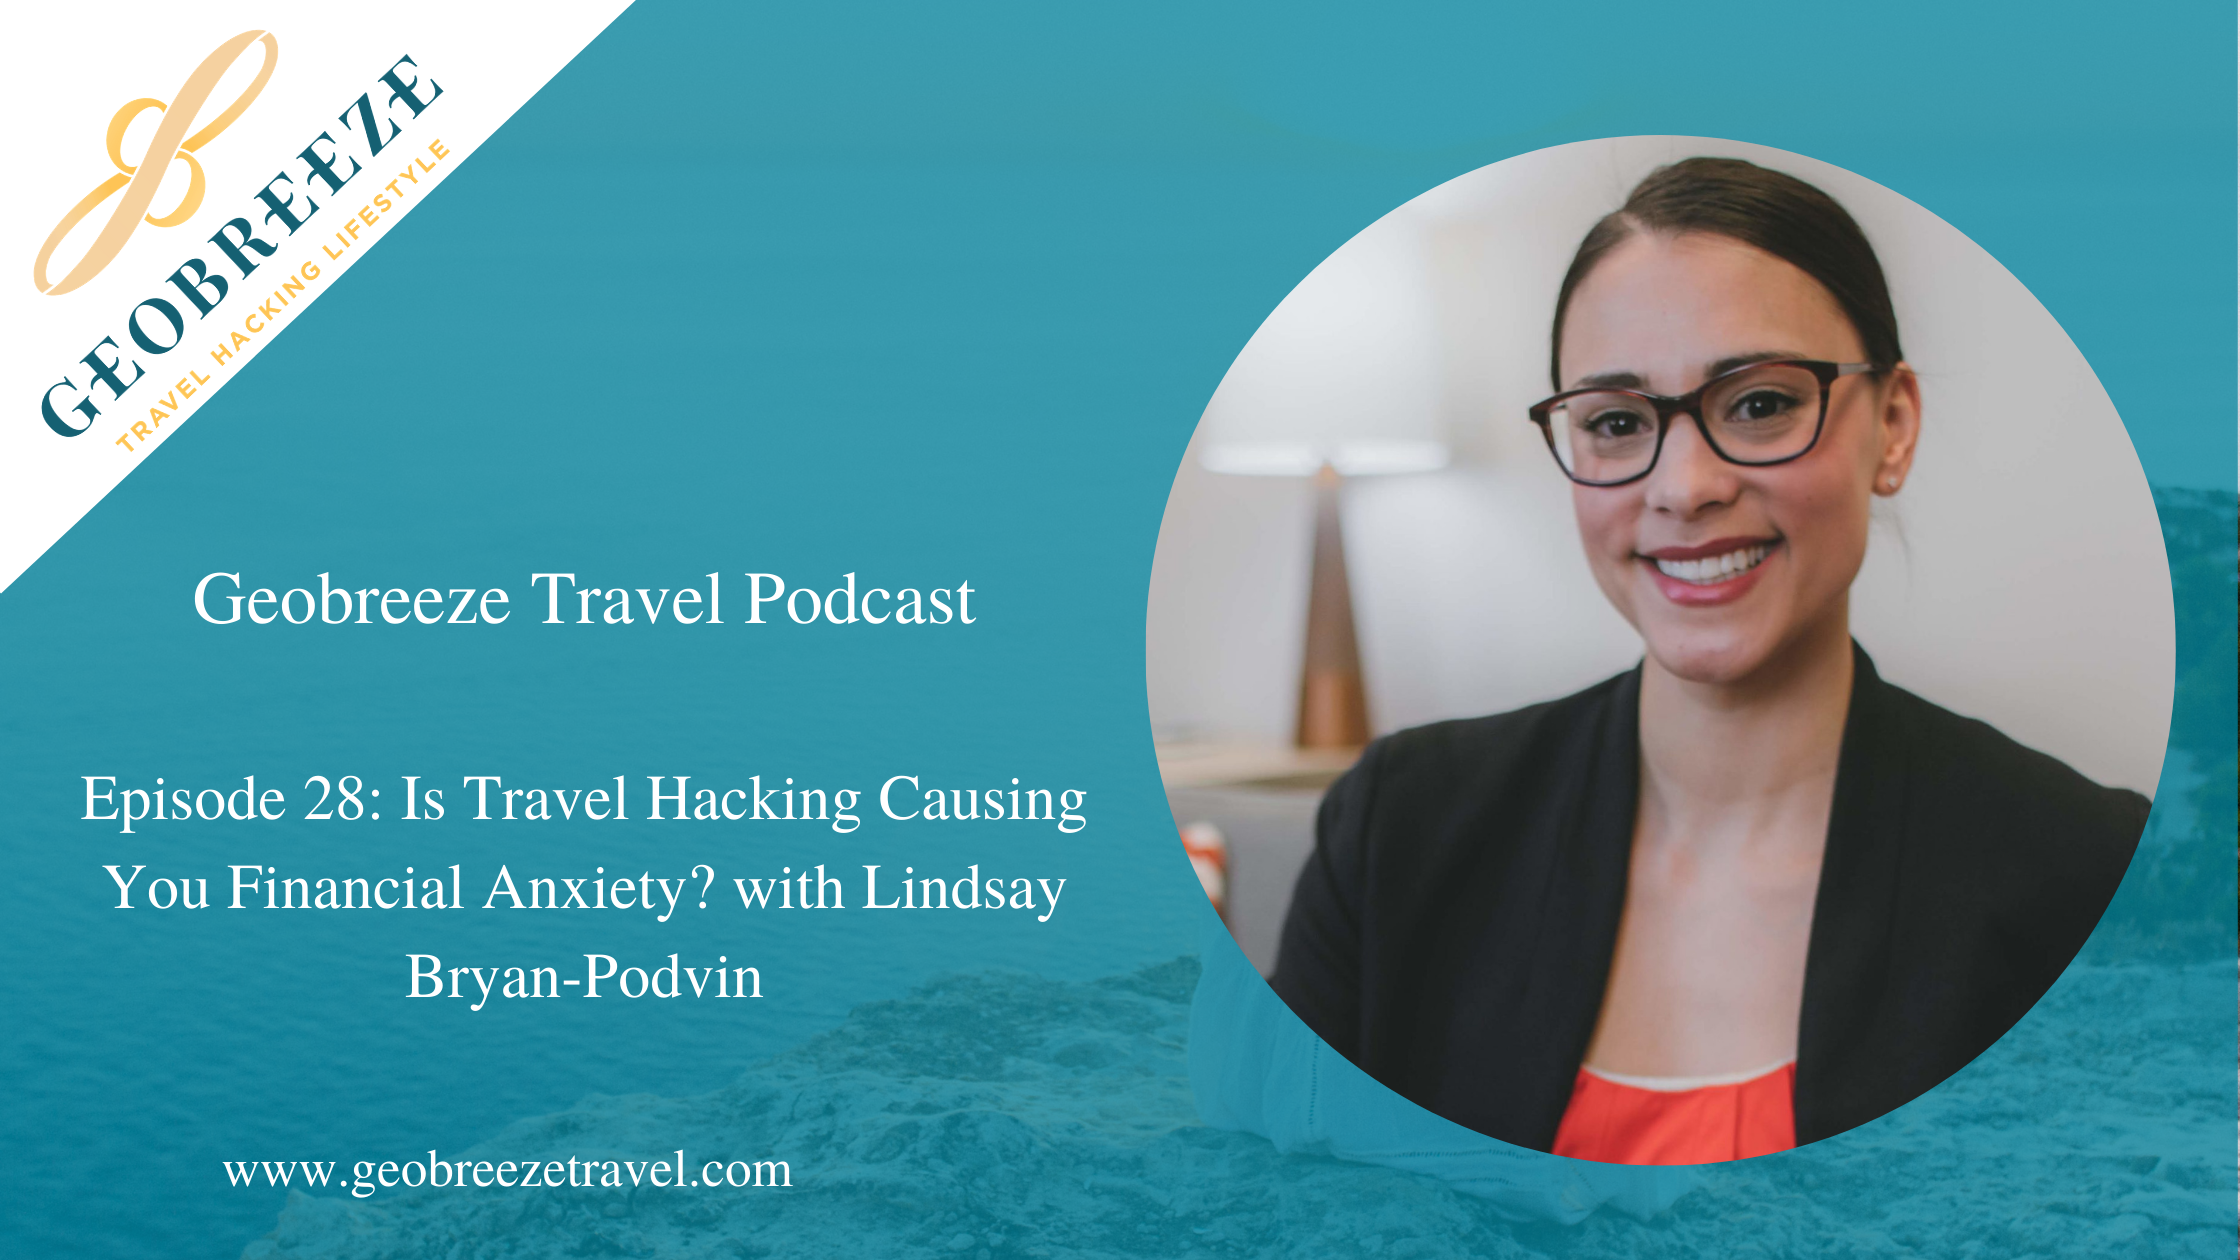 Episode 28: Is Travel Hacking Causing You Financial Anxiety? with Lindsay Bryan-Podvin